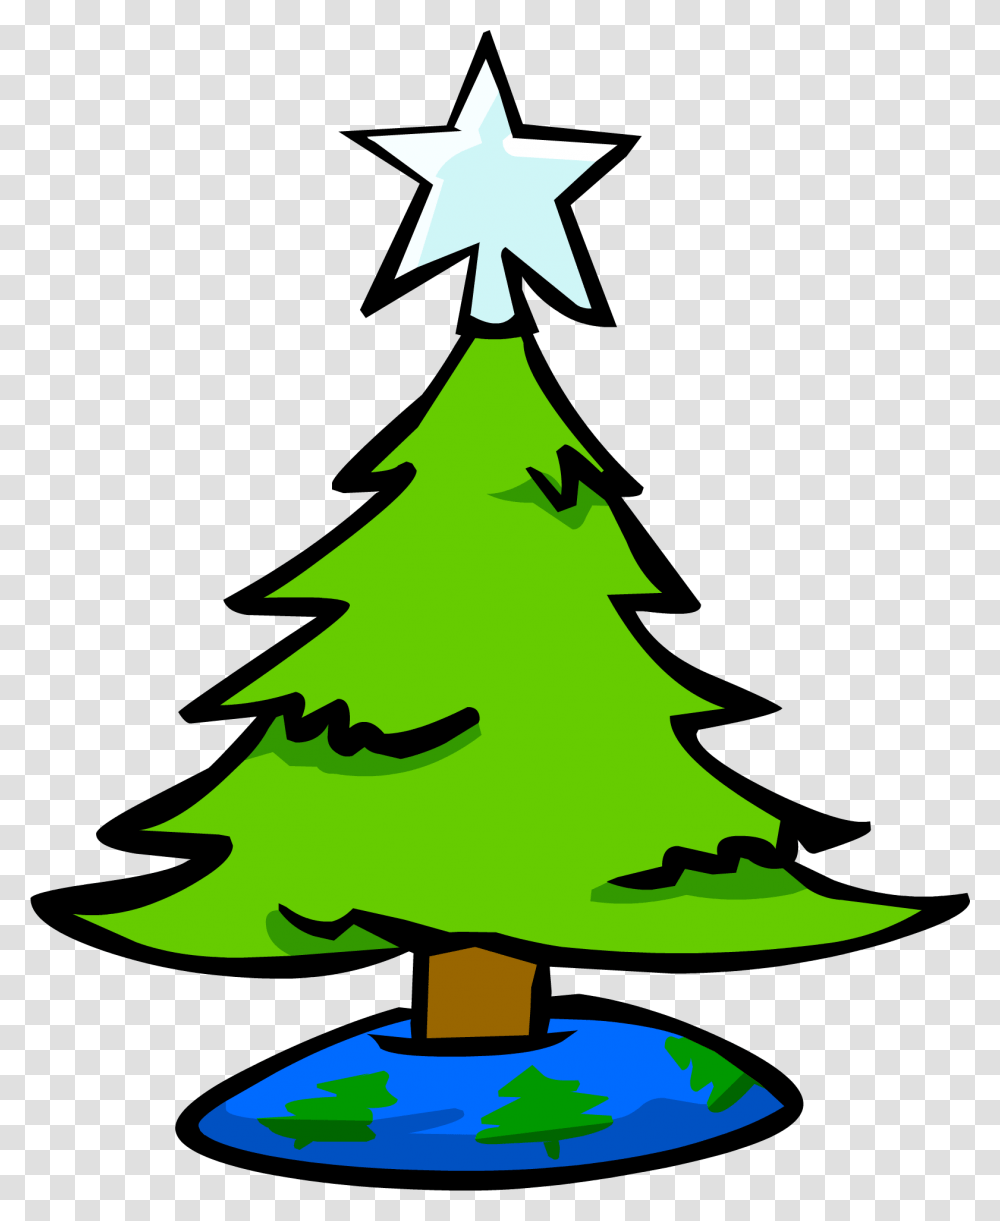 Club Penguin Rewritten Wiki Small Picture Of Christmas Tree, Plant, Star Symbol, Person Transparent Png